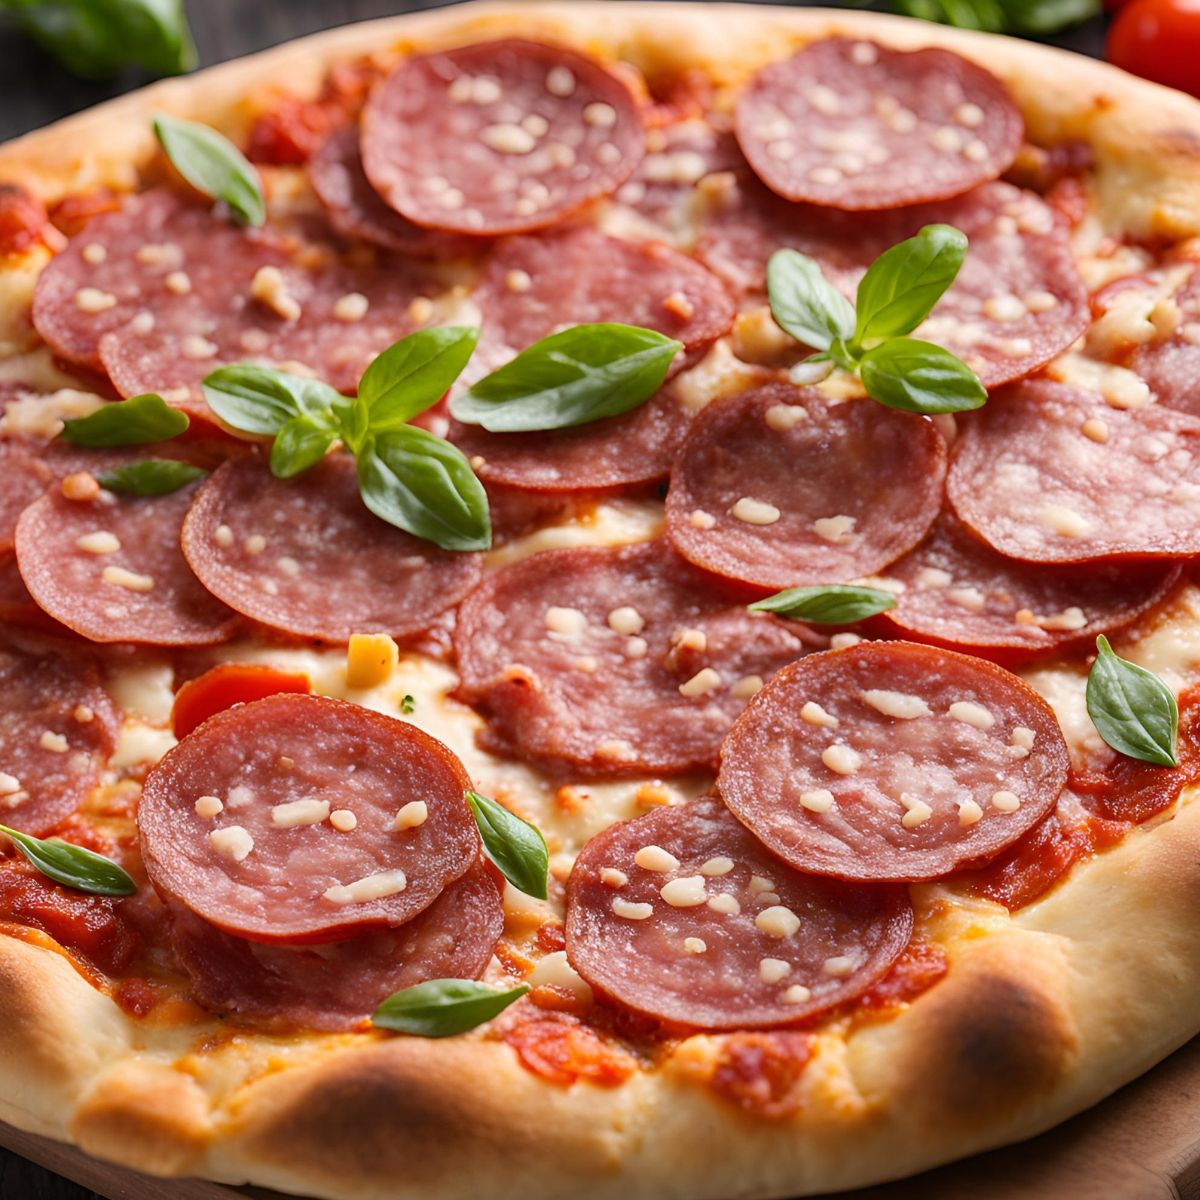 Salami on Pizza Recipe: Deliciously Spicy and Savory!